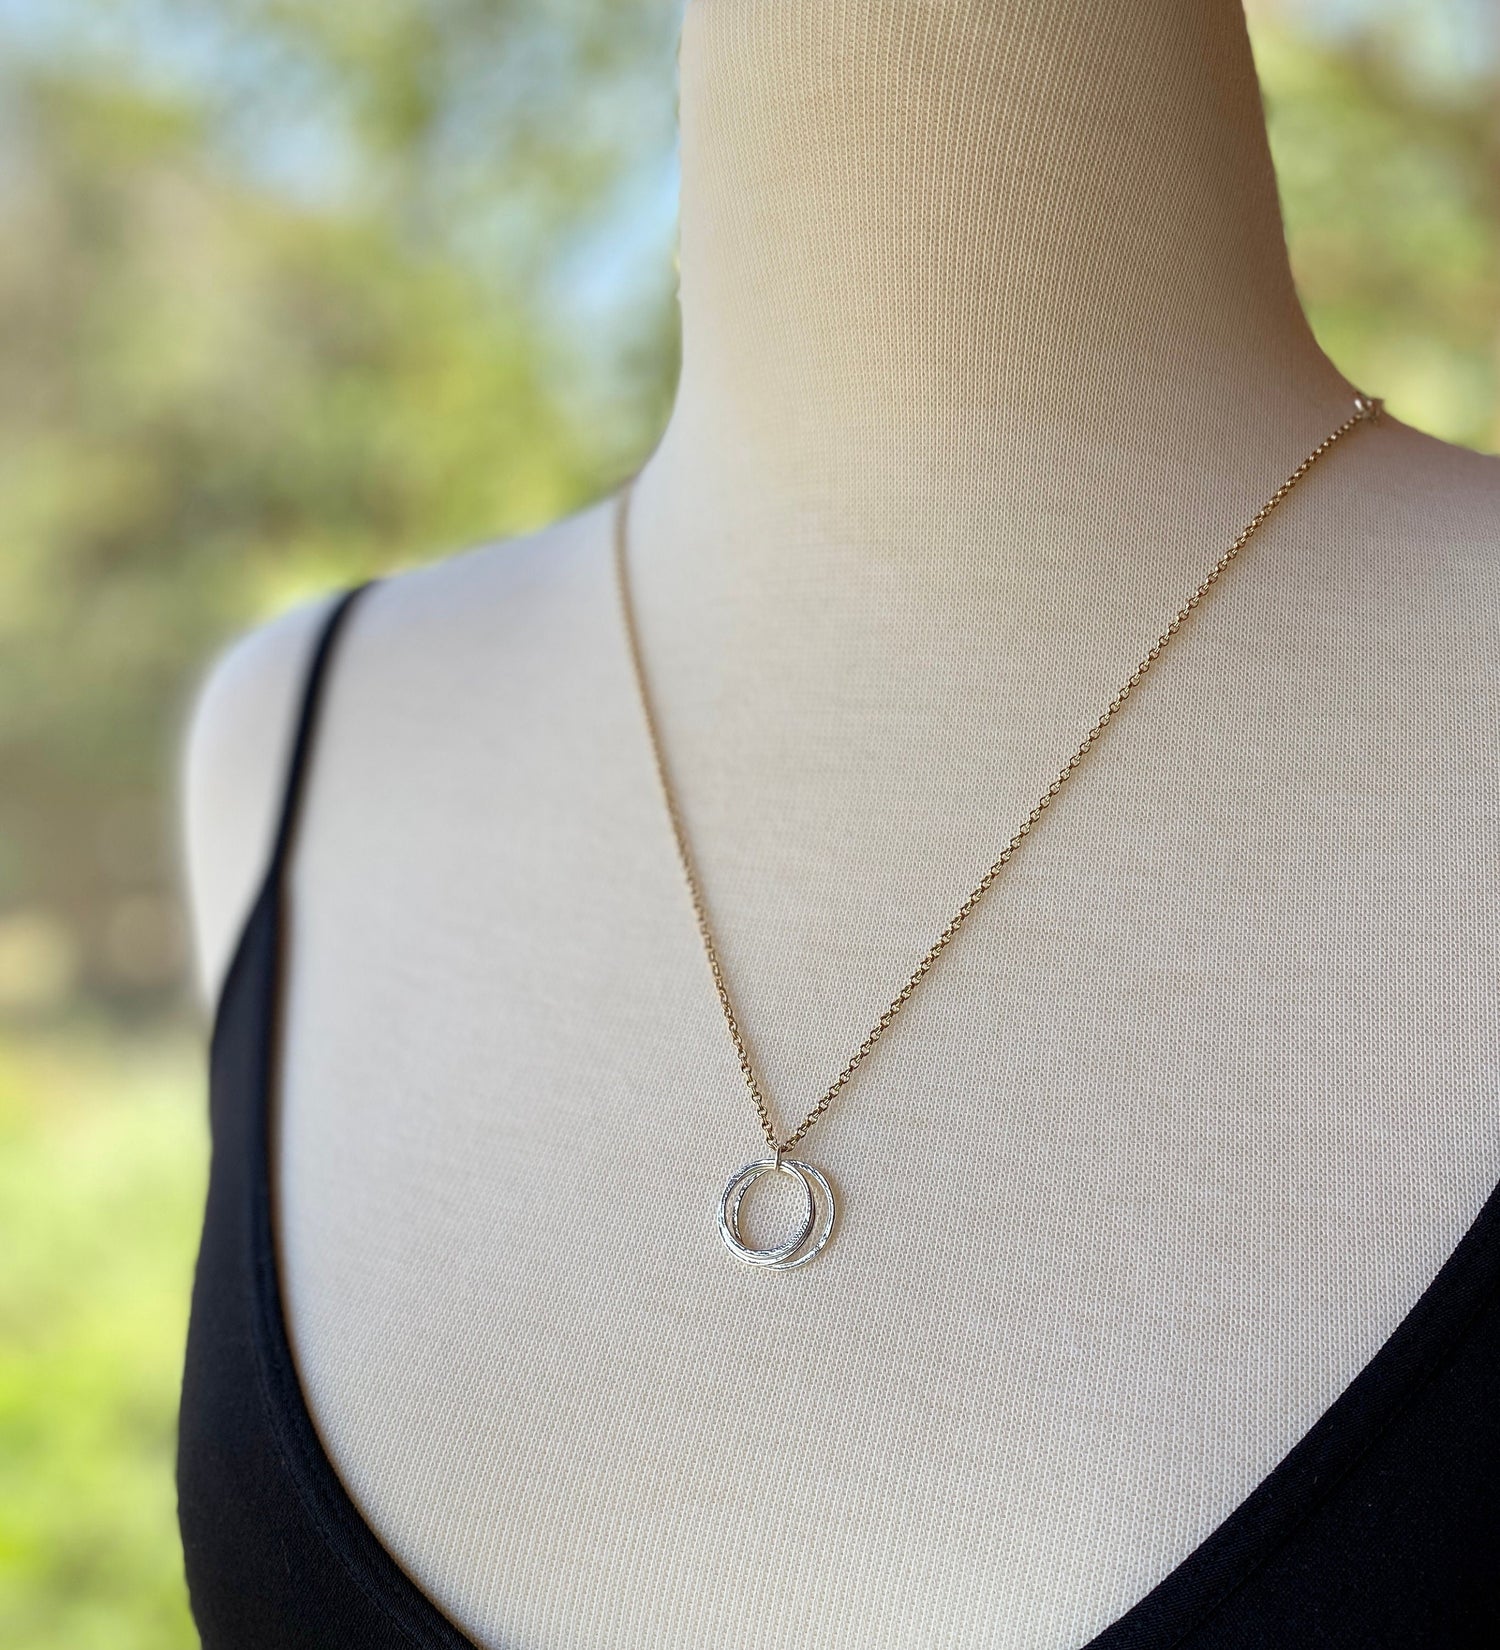 Handcrafted 30th Birthday Mixed Metal Minimalist Milestone Layered Three Circle Necklace, Perfectly Imperfect 3 Rings for 3 Decades